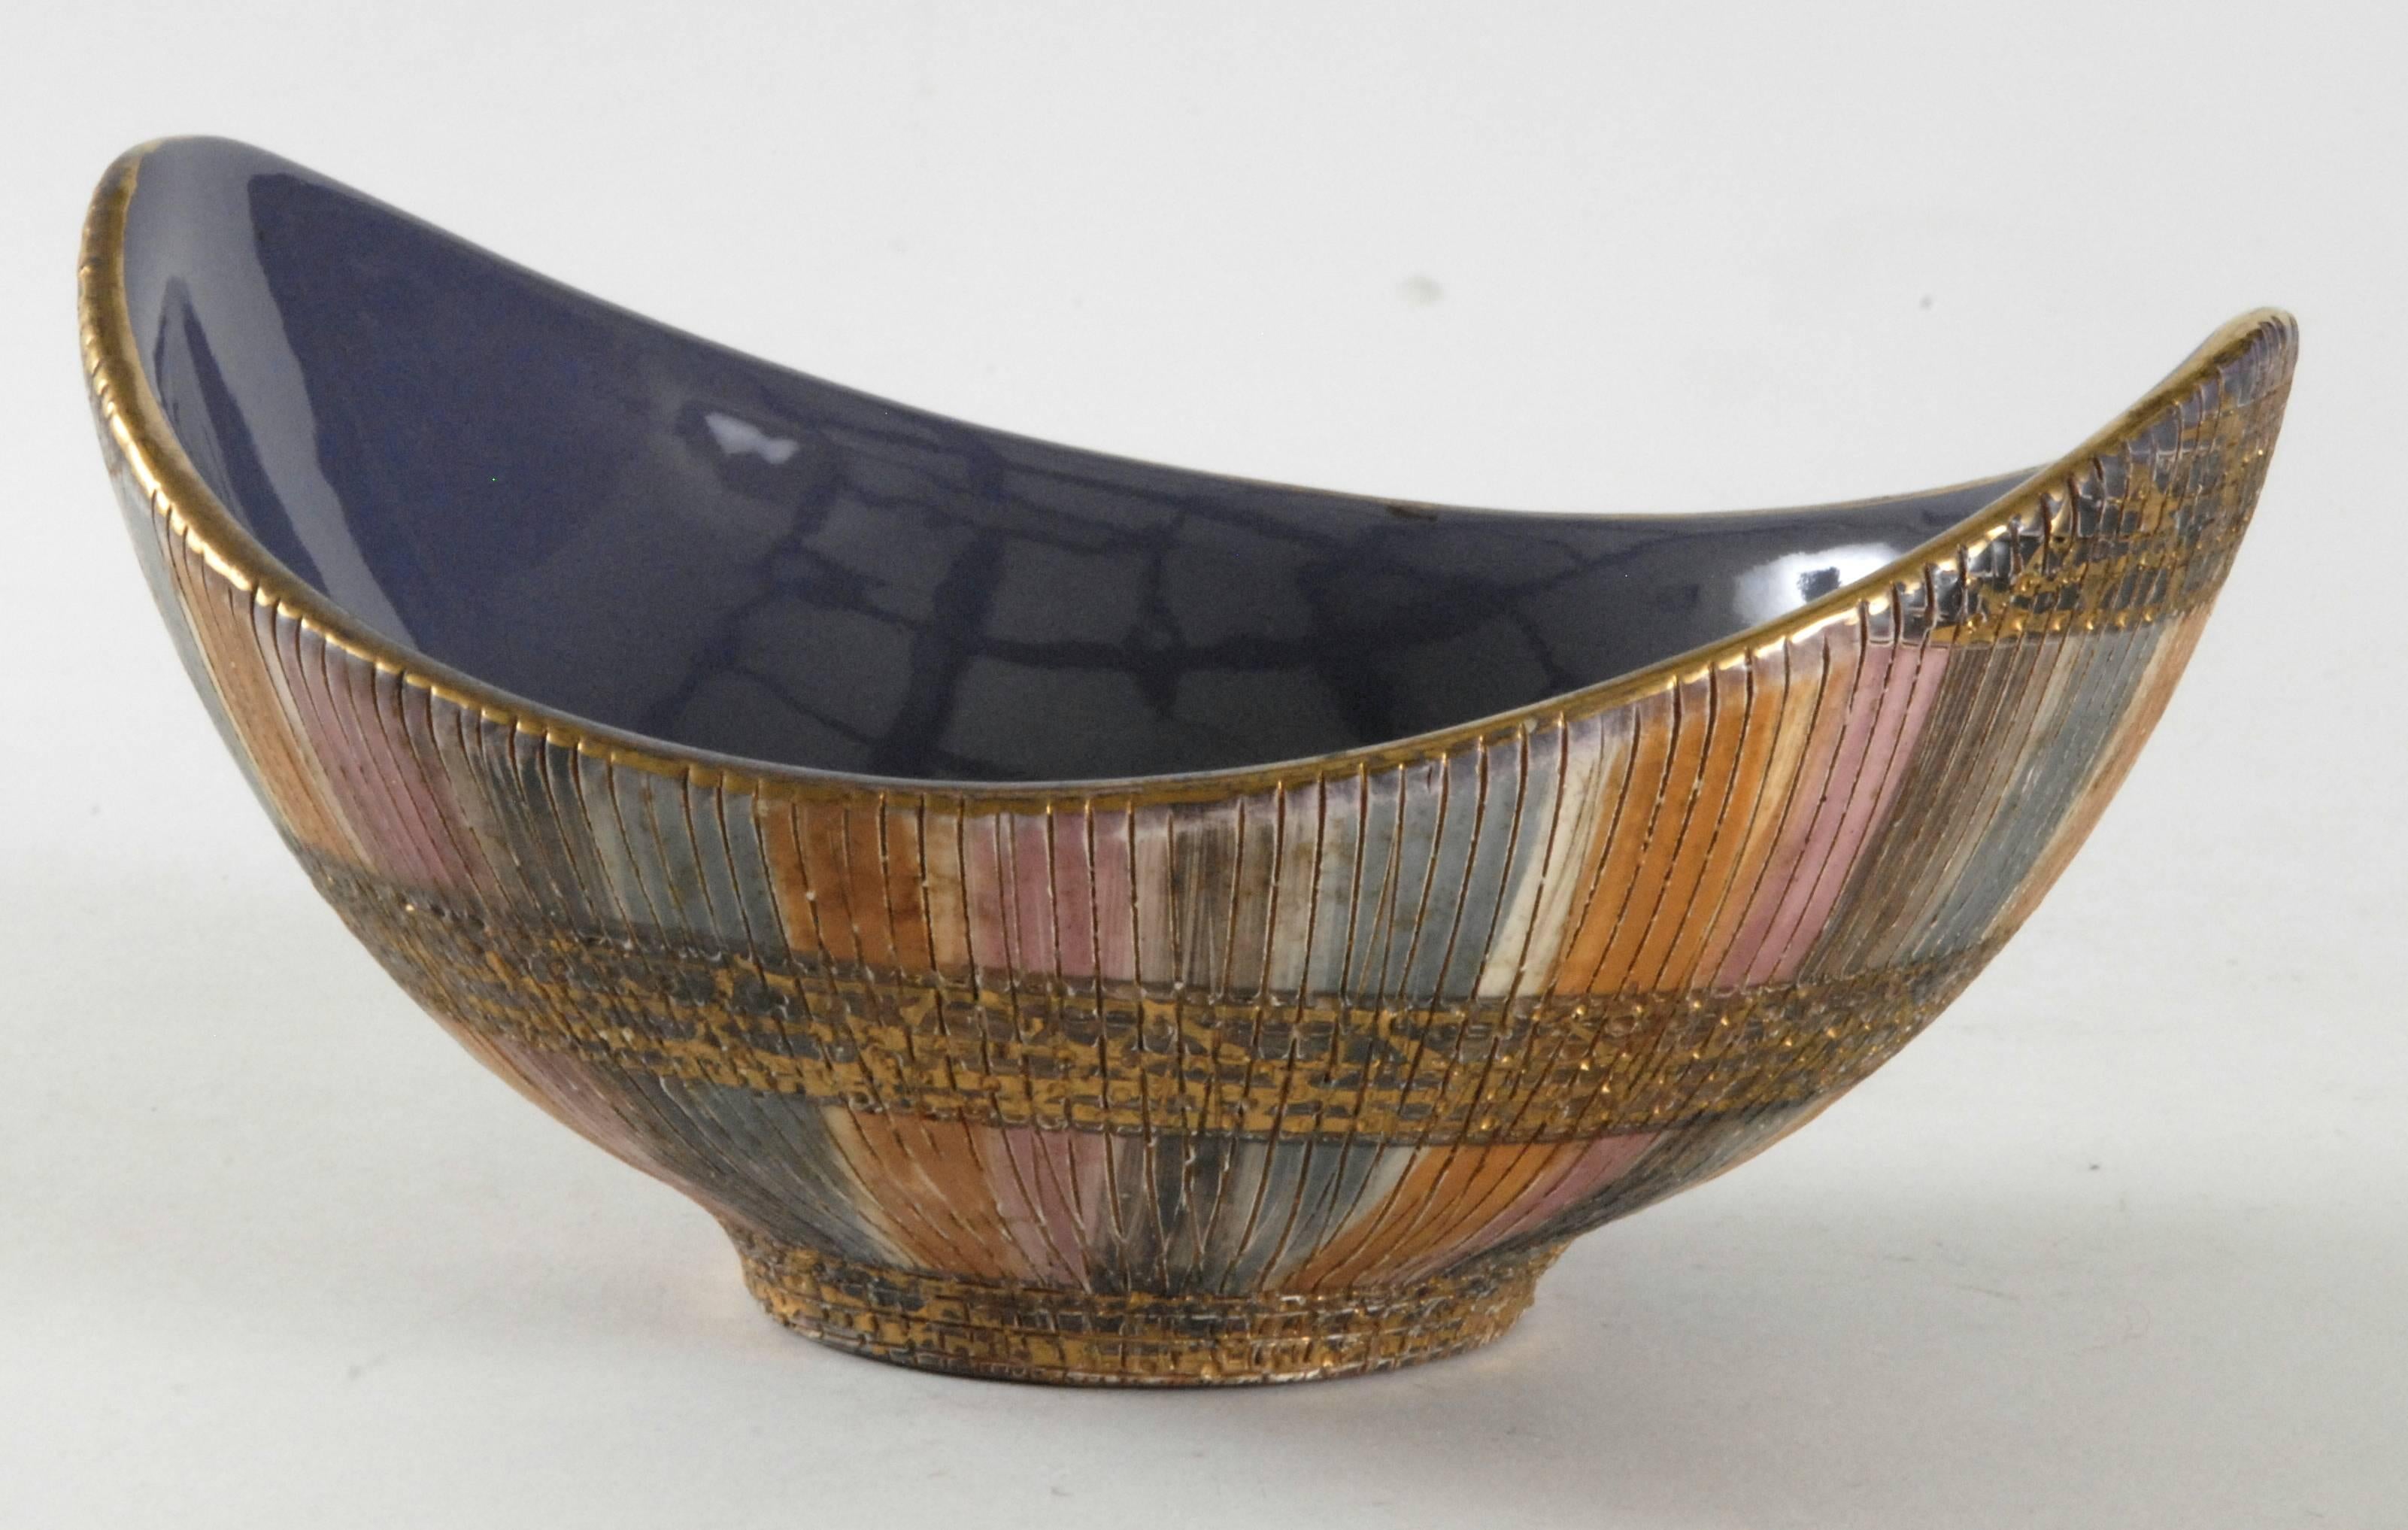 Londi designed the 'Seta' [Silk] pattern circa 1957 and it continued into the 1960s. The exterior decorated with bands of Sgraffito lines and blue, orange, pink and gilt glazes, the interior with a glossy purple glaze, the base painted in black.